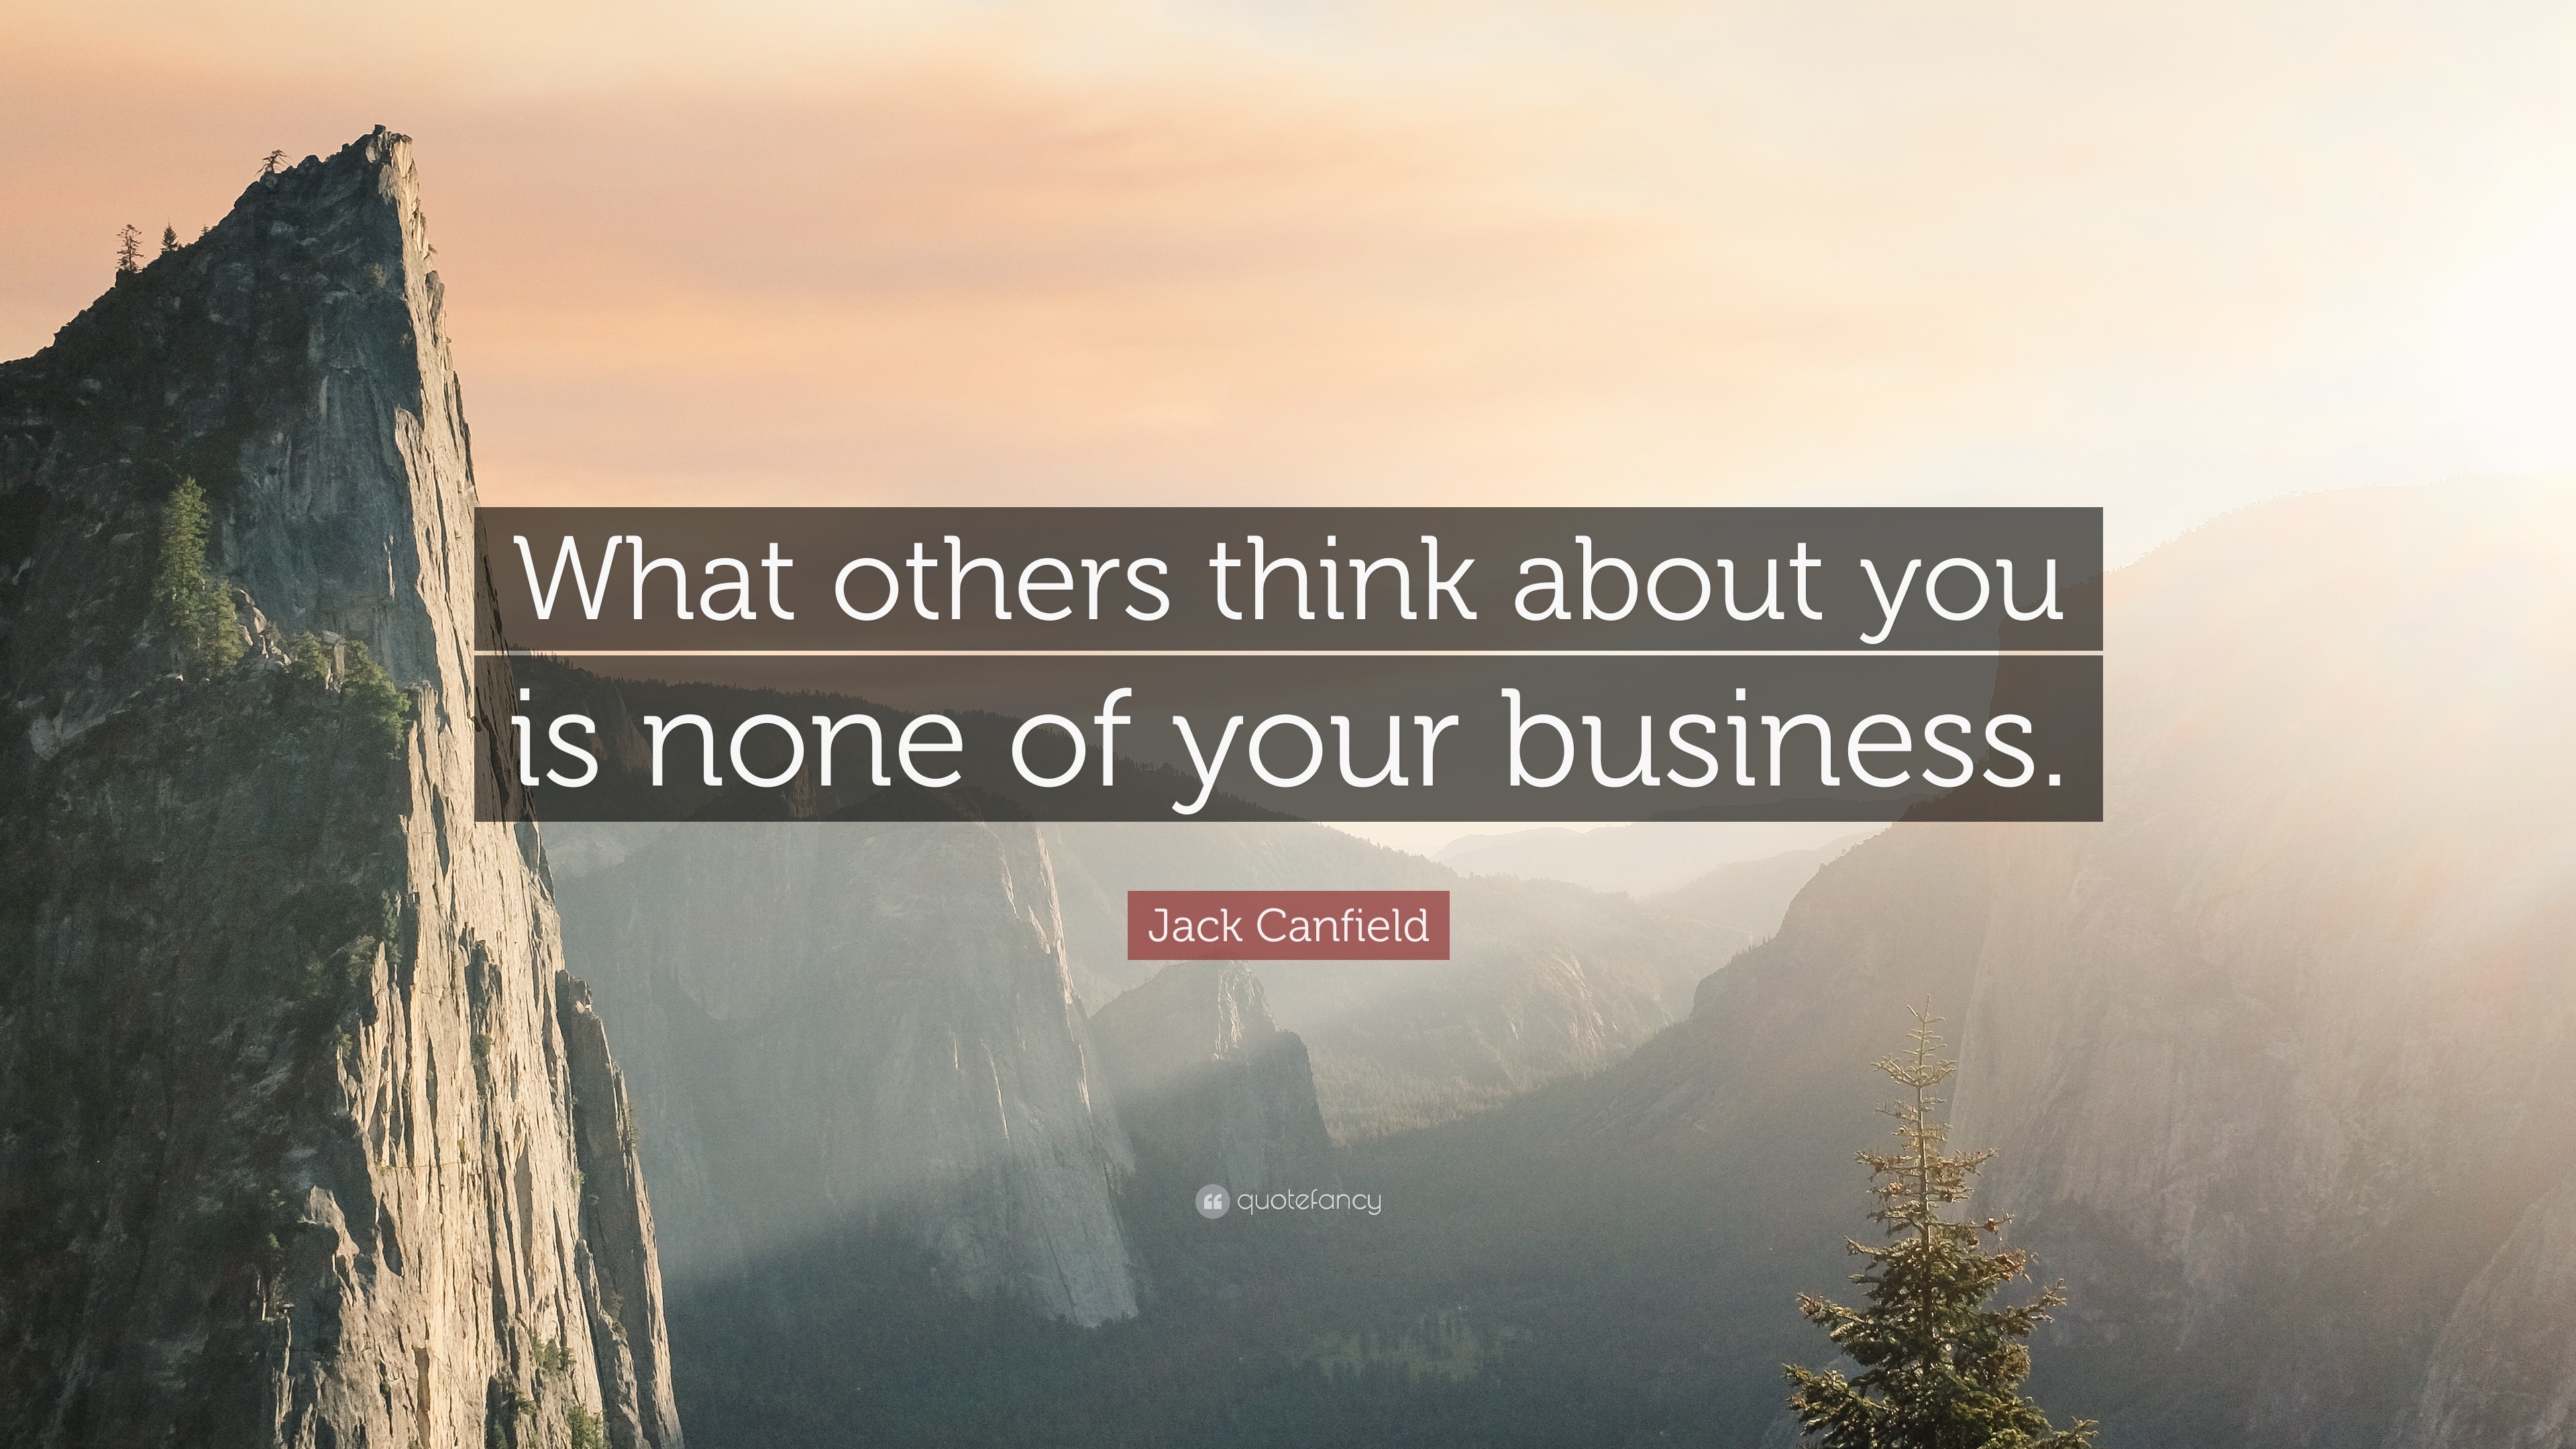 Jack Canfield Quote: “What others think about you is none of your